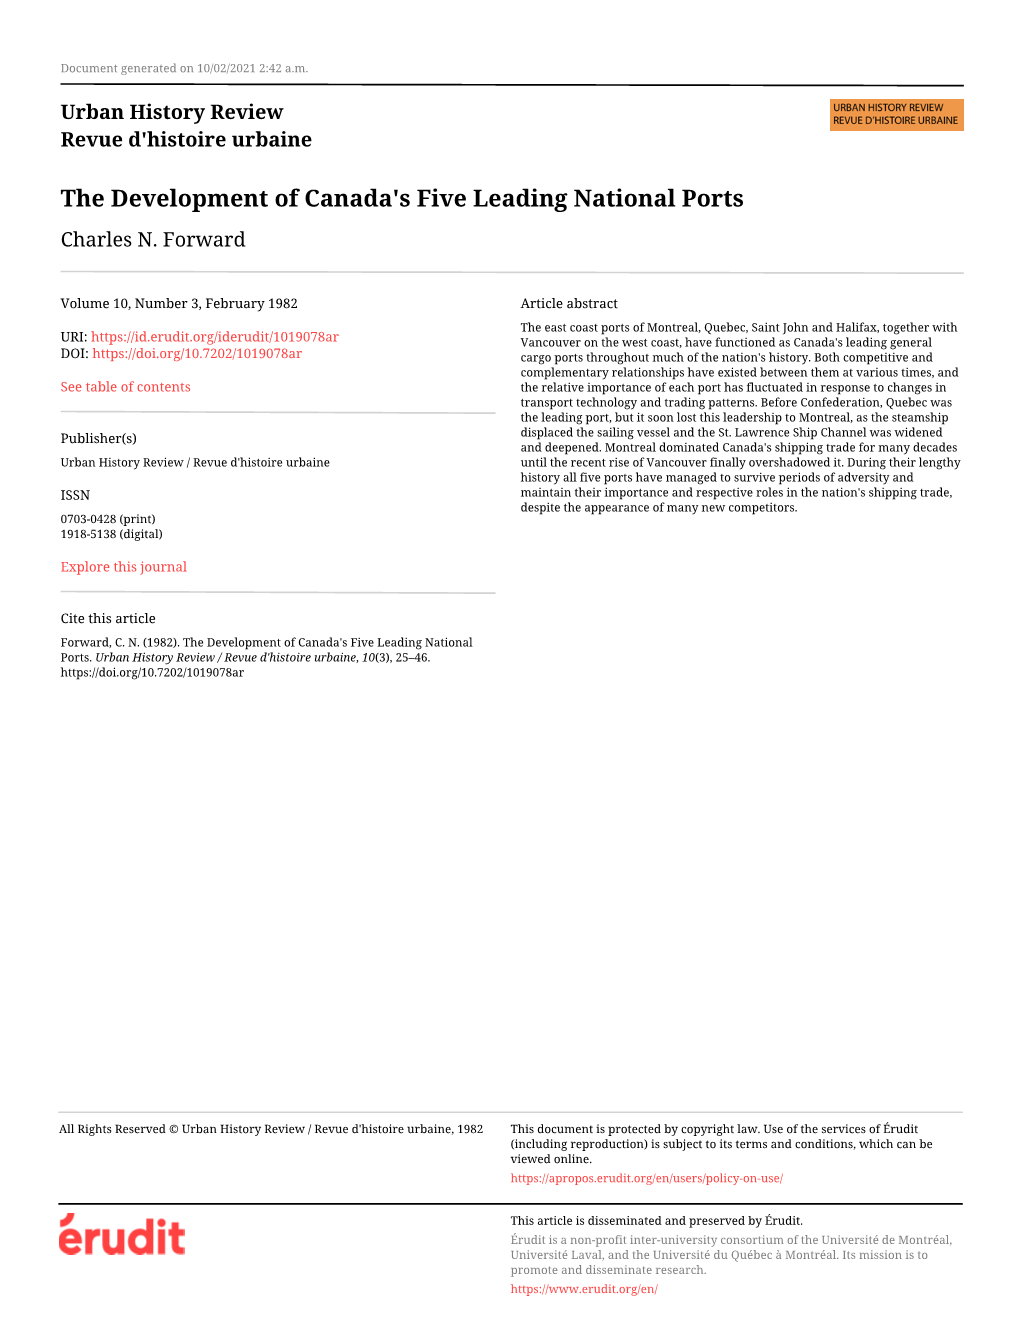 The Development of Canada's Five Leading National Ports Charles N